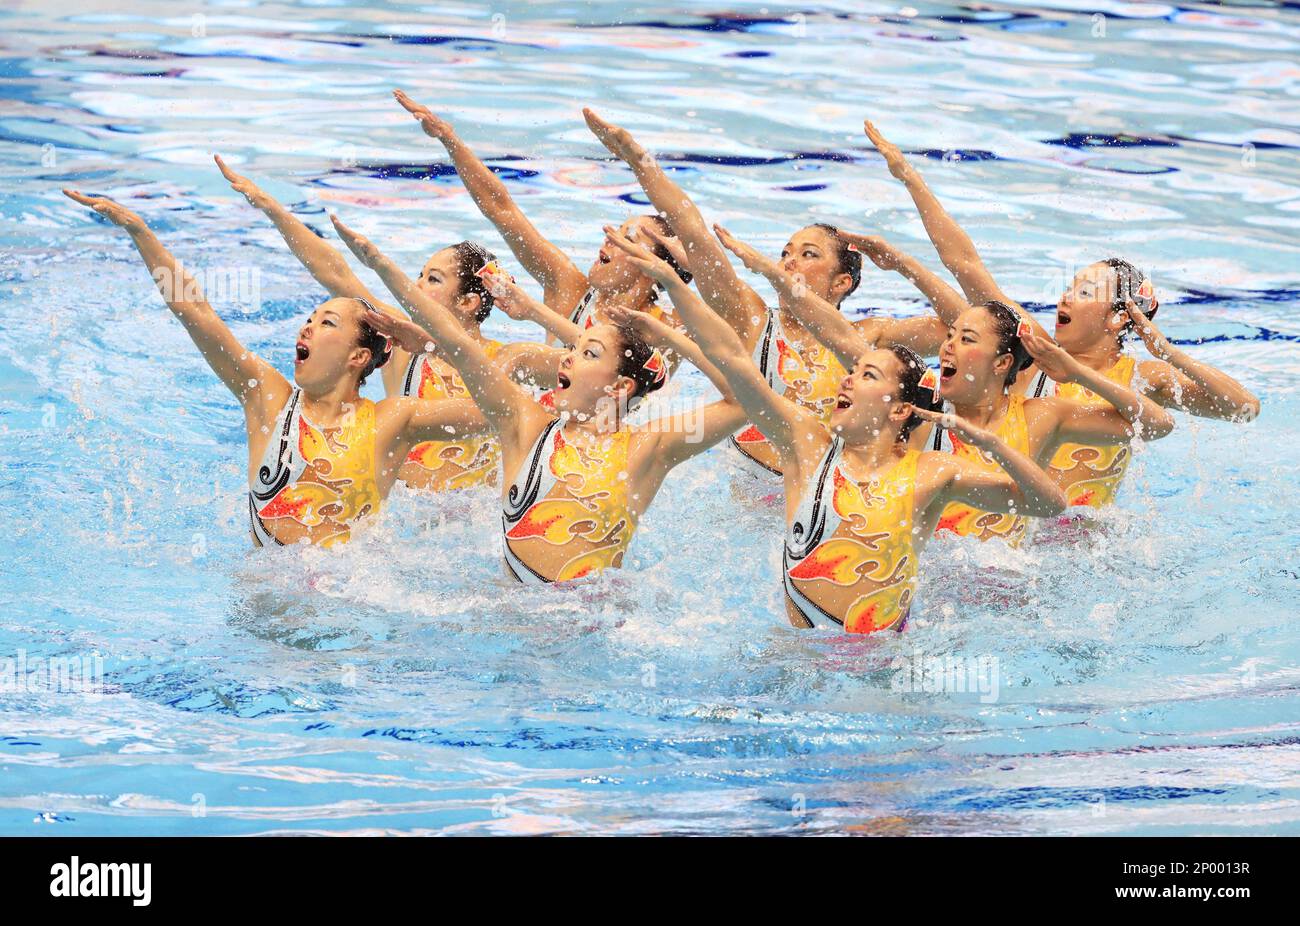 Japans synchronized swim team performs its free routine during Japan Open FINA Synchronized Swimming World Series at Tatsumi International Swimming Center in Tokyo on April 30, 2017